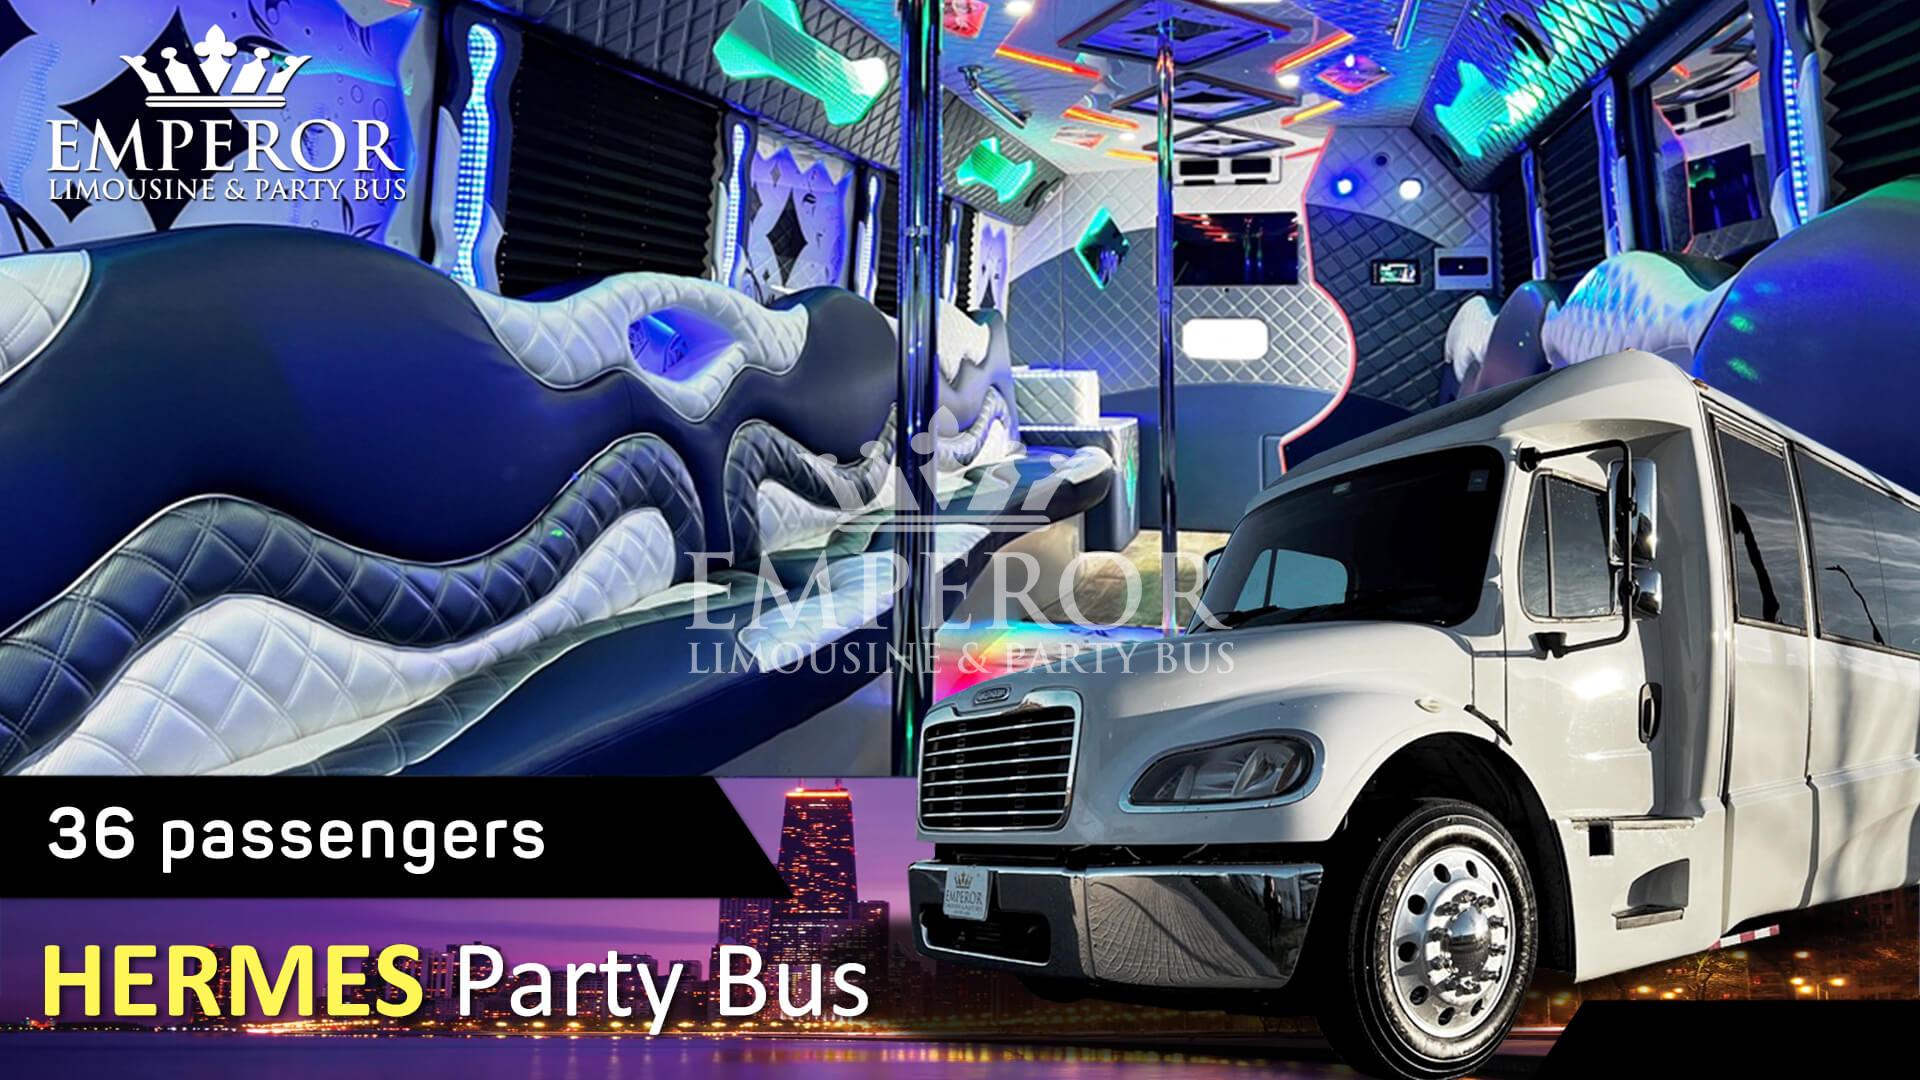 Party bus rental in Alsip, IL - Hermes Edition